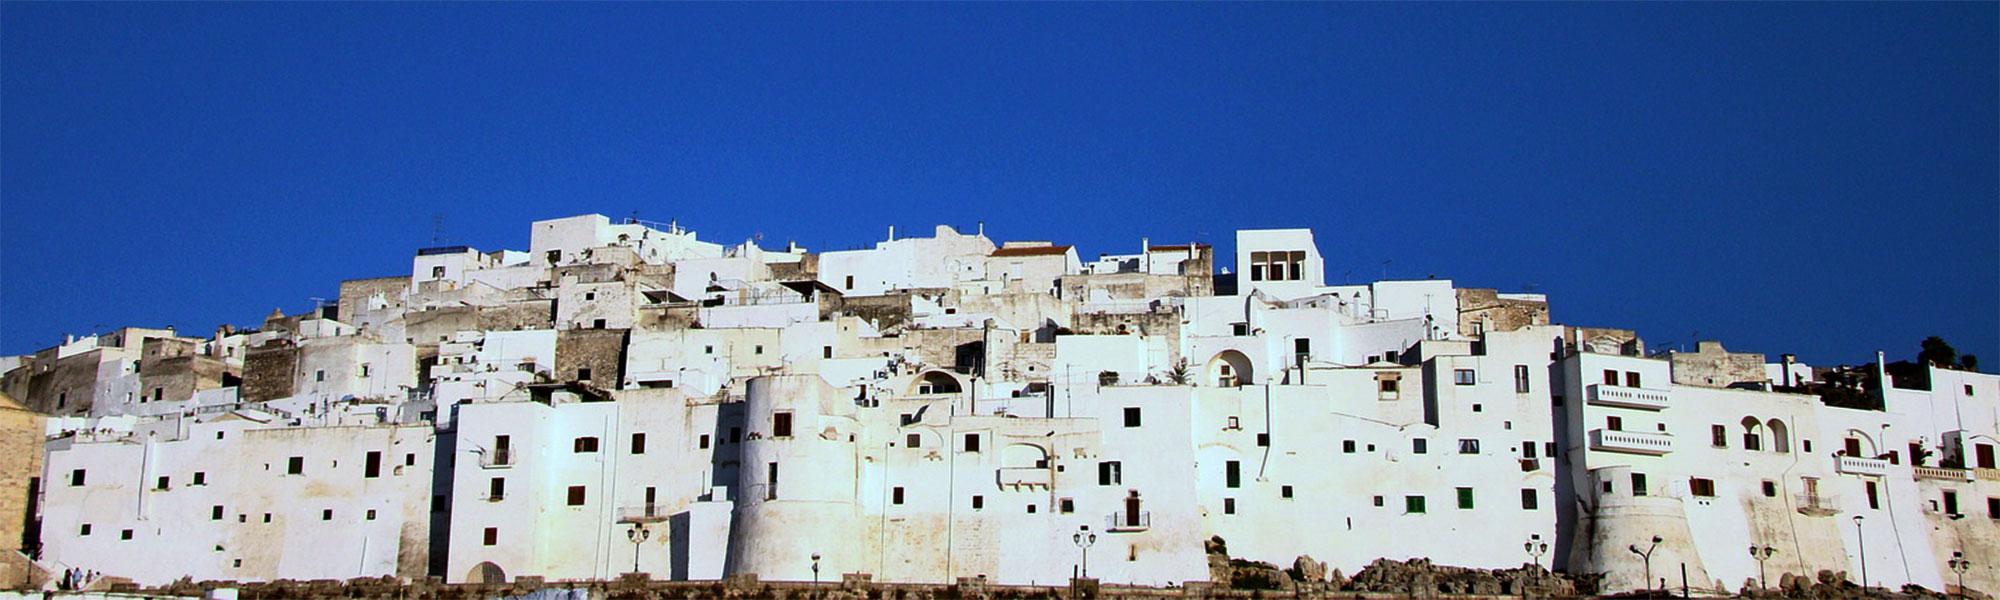 Best things to see and monuments in Ostuni, Puglia - Agriturismo Masseria Salento 2